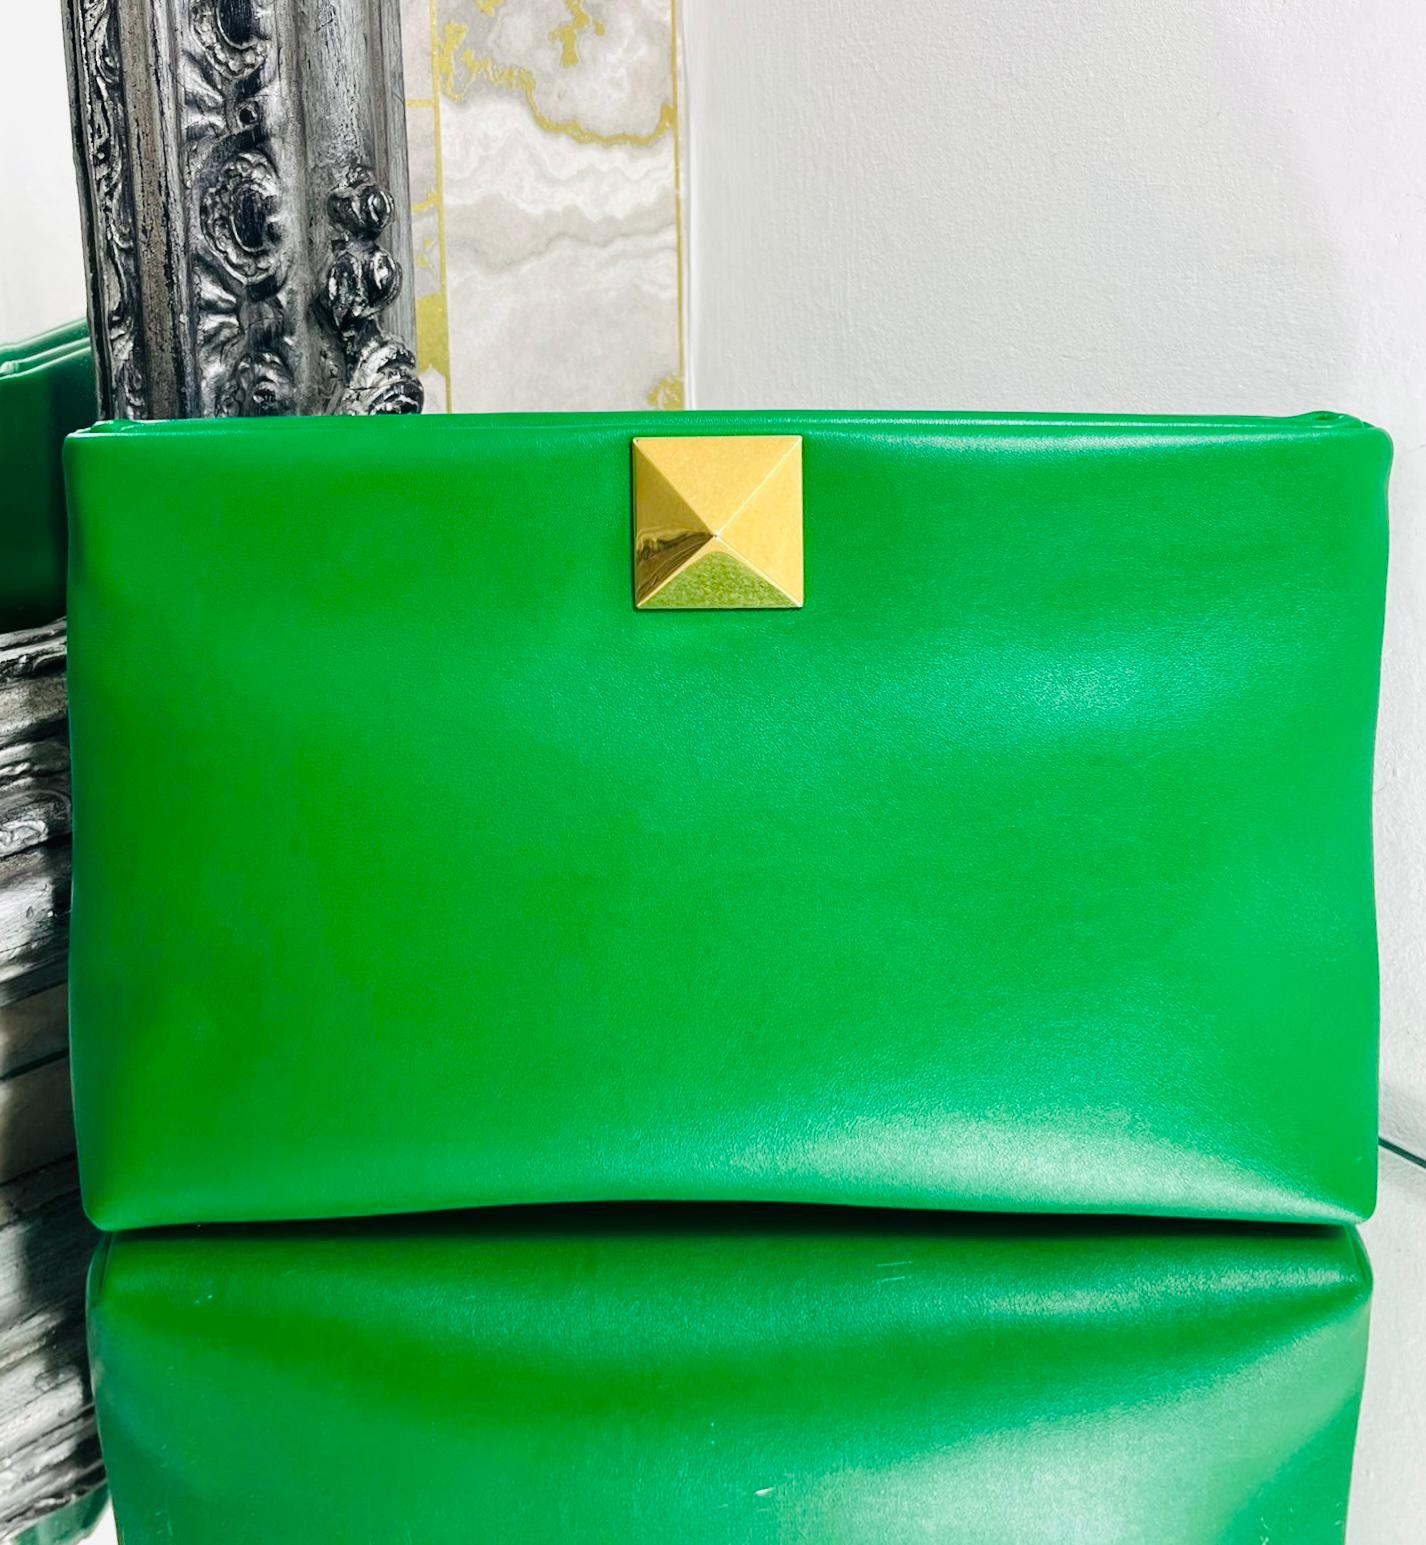 Valentino One Stud Leather Clutch Bag

Green clutch bag designed with signature gold, oversized Rockstud to front.

Featuring top snap closure leading to leather interior with one zipped pocket.

Size – Height 21cm, Width 34cm, Depth 5cm

Condition